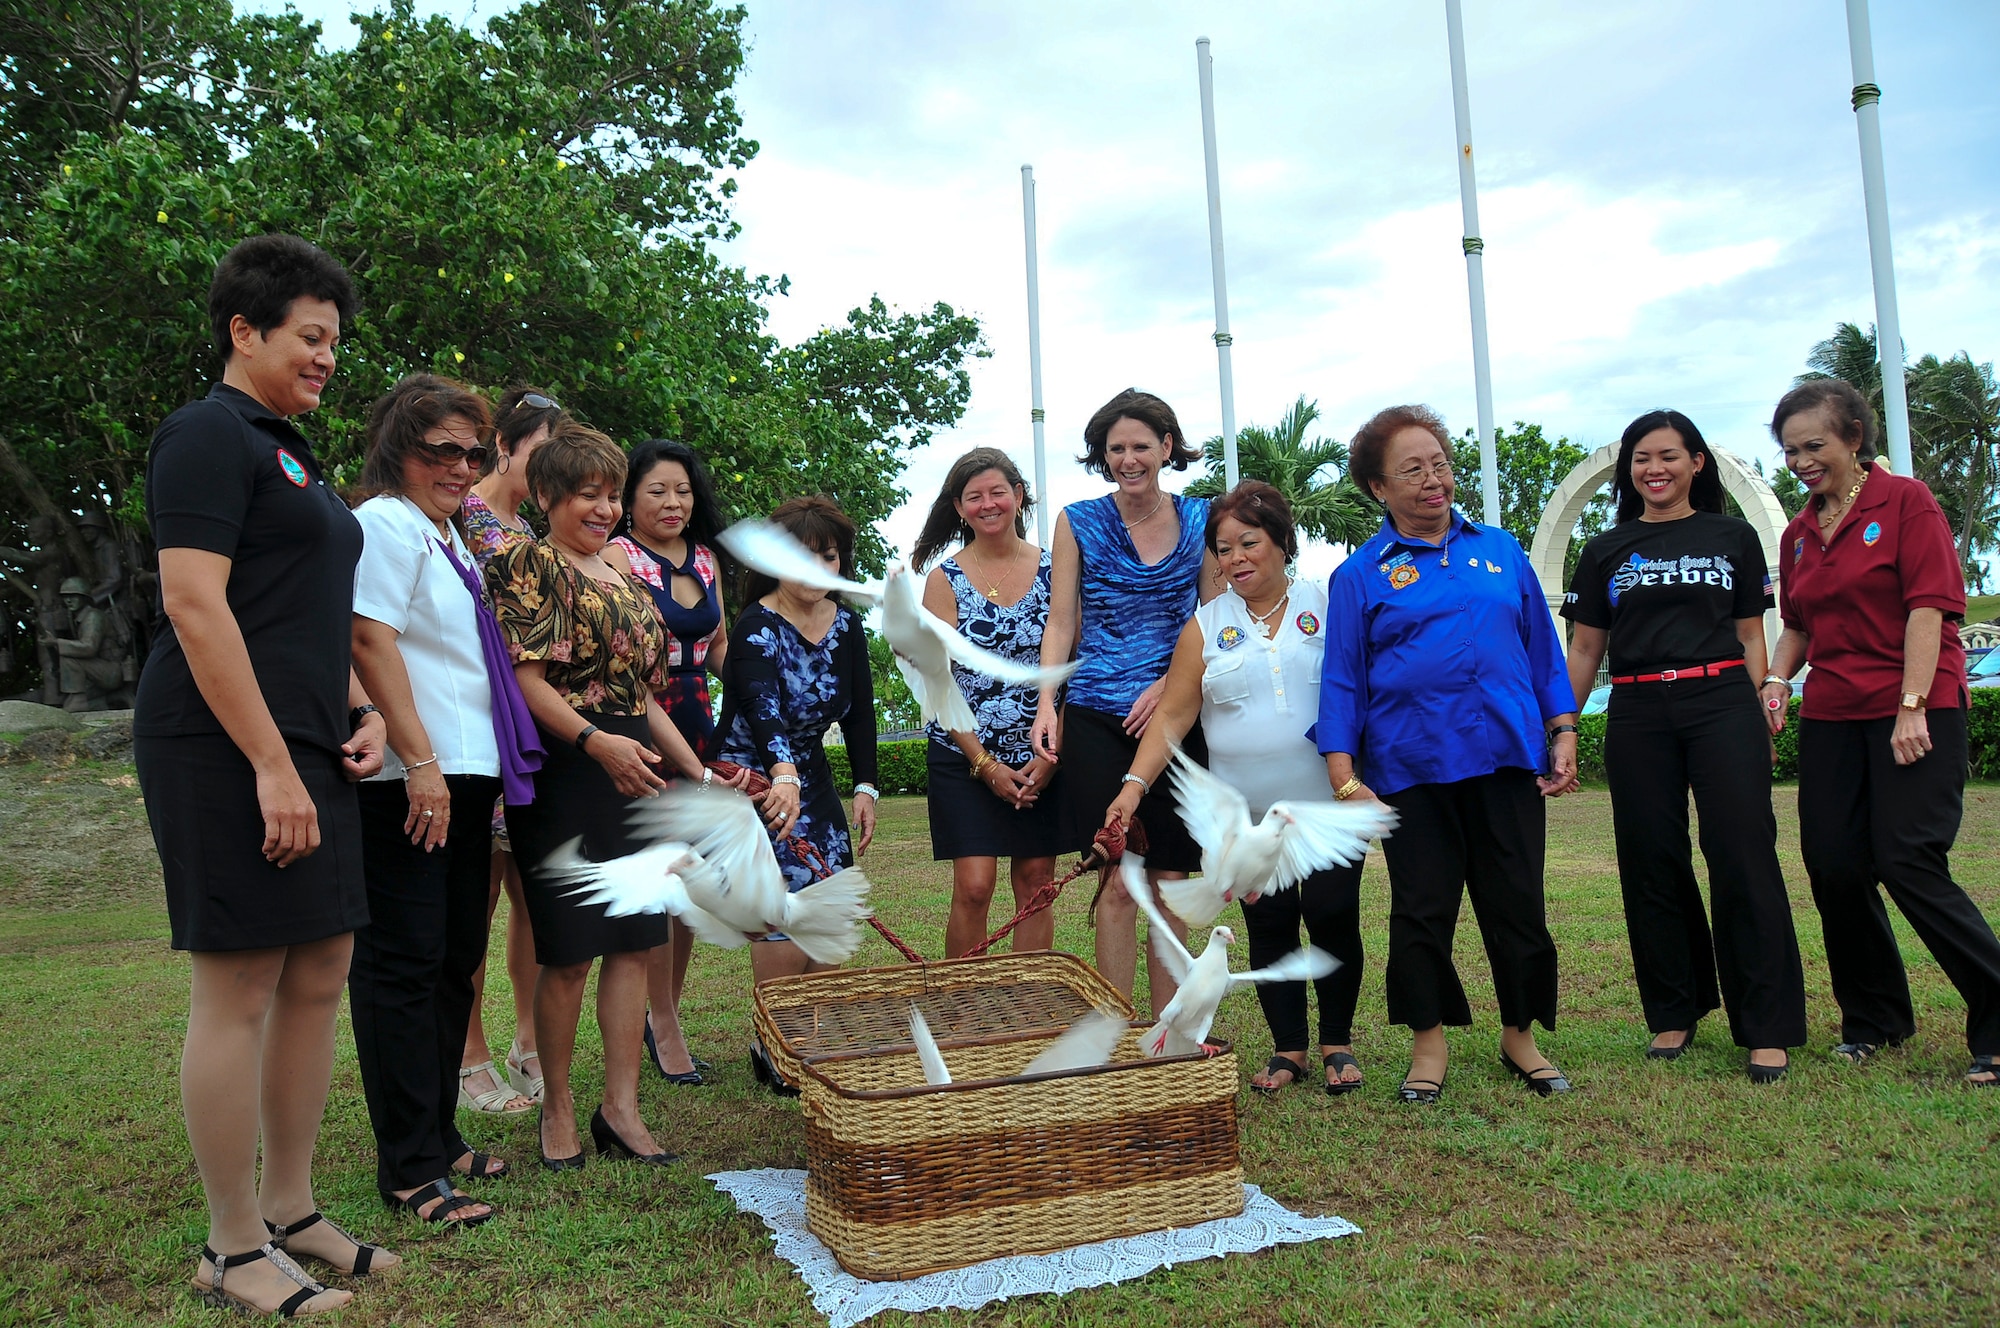 Distinguished guests for the annual Memorial Day Ceremony at the Guam Governor’s Complex release “freedom birds” at the end of the ceremony on May 26, 2014. Earlier in the Memorial Day ceremony, the guests laid a wreath on a representation of the Tomb of the Unknown Warrior, to honor service members whose remains are still missing or haven’t been identified. (U.S. Air Force Photo by Staff Sgt. Brok McCarthy/Released)